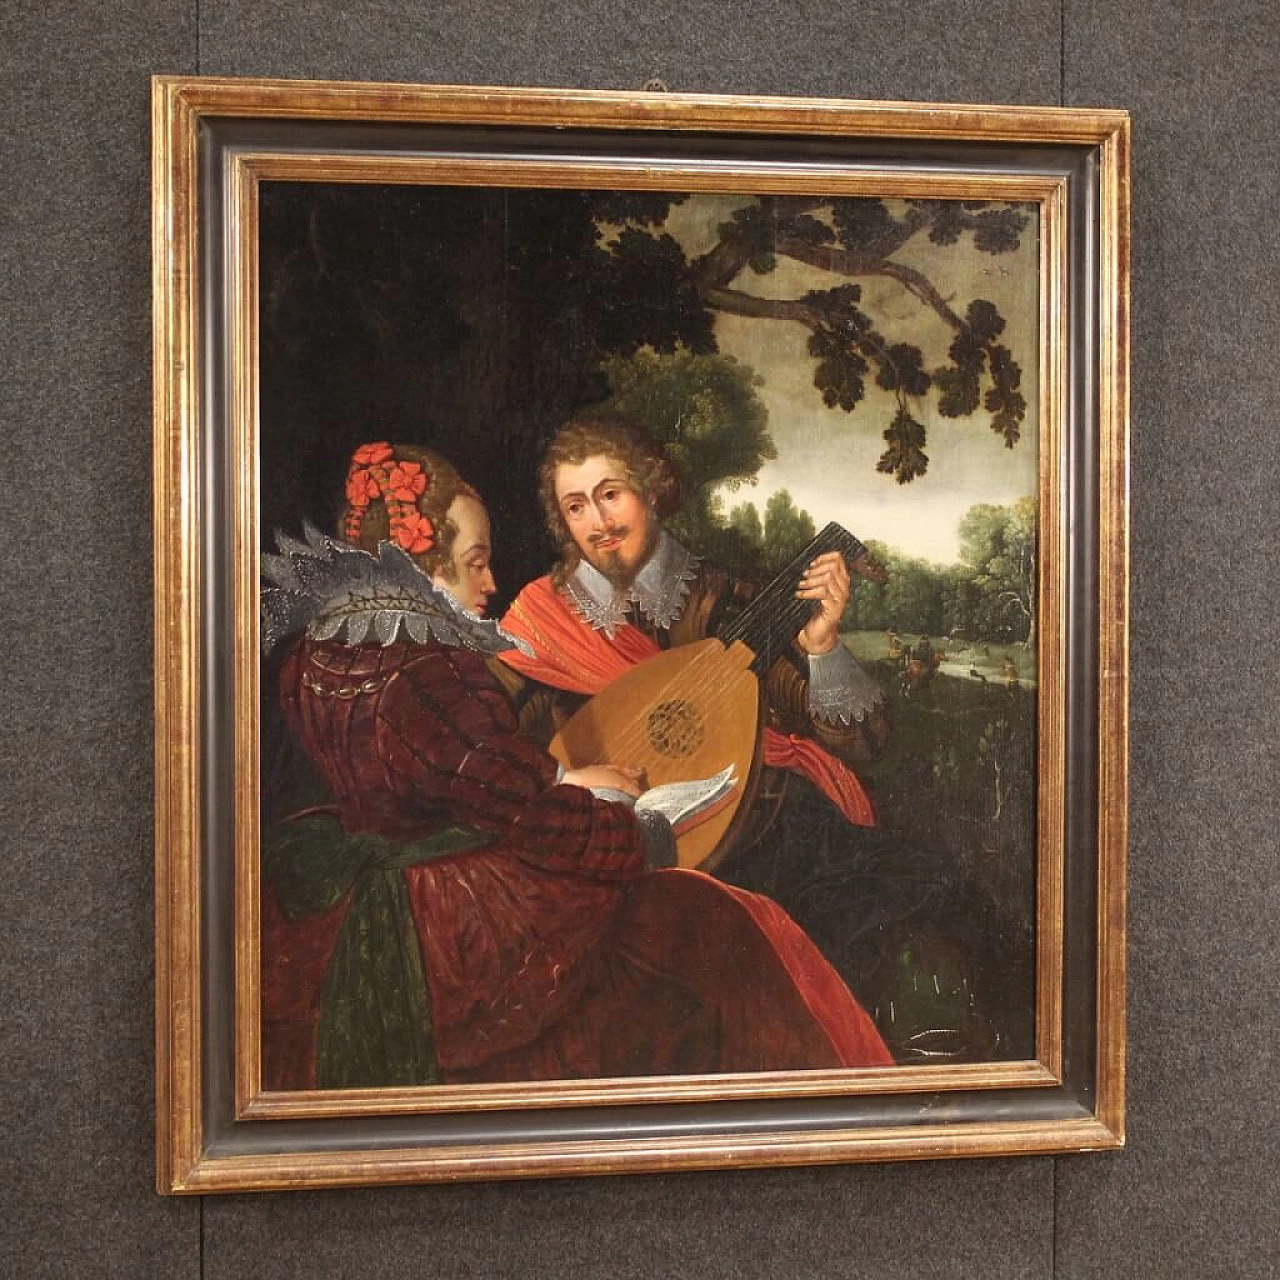 Musicians and hunting scene, Flemish oil painting, 17th century 1404021